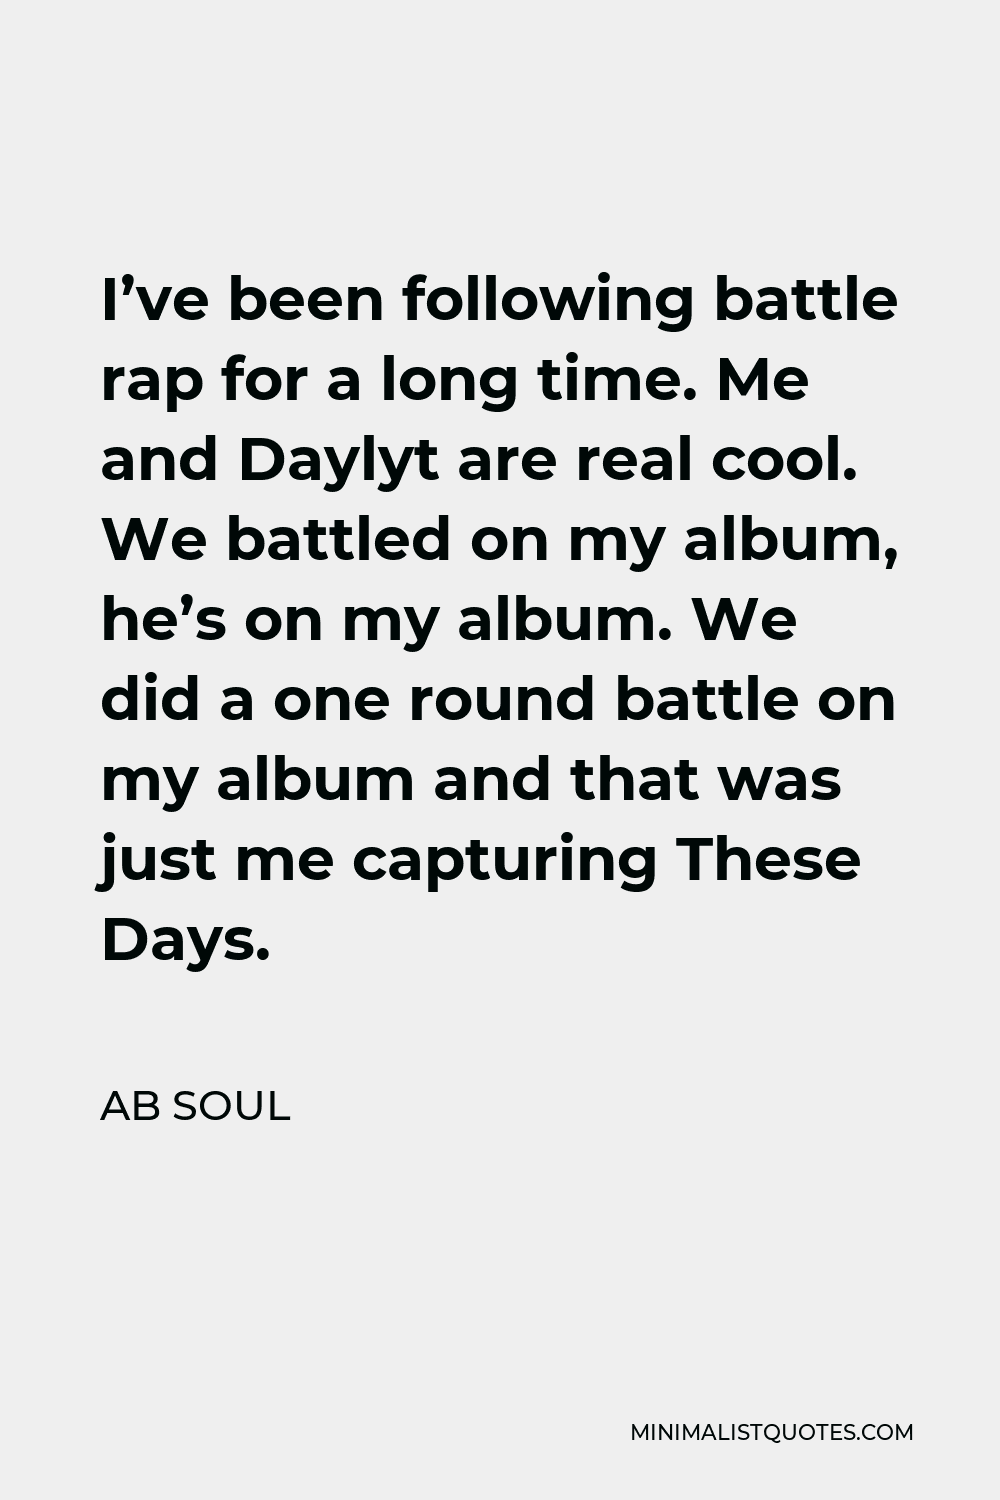 AB Soul Quote - I’ve been following battle rap for a long time. Me and Daylyt are real cool. We battled on my album, he’s on my album. We did a one round battle on my album and that was just me capturing These Days.